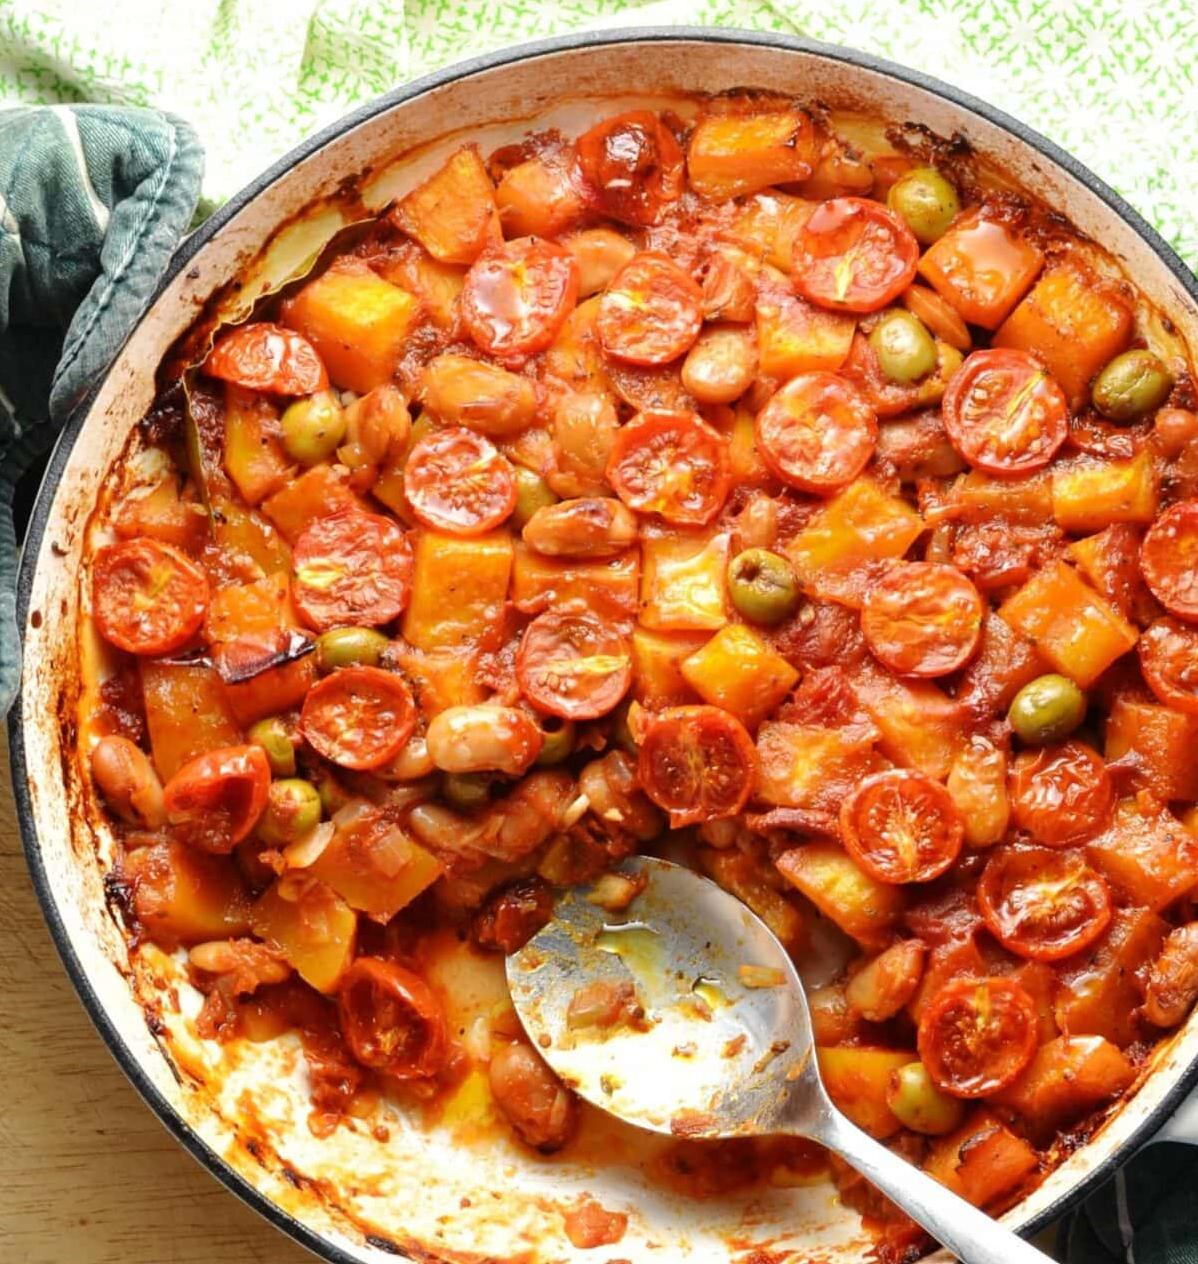  A creamy and flavorful vegan casserole